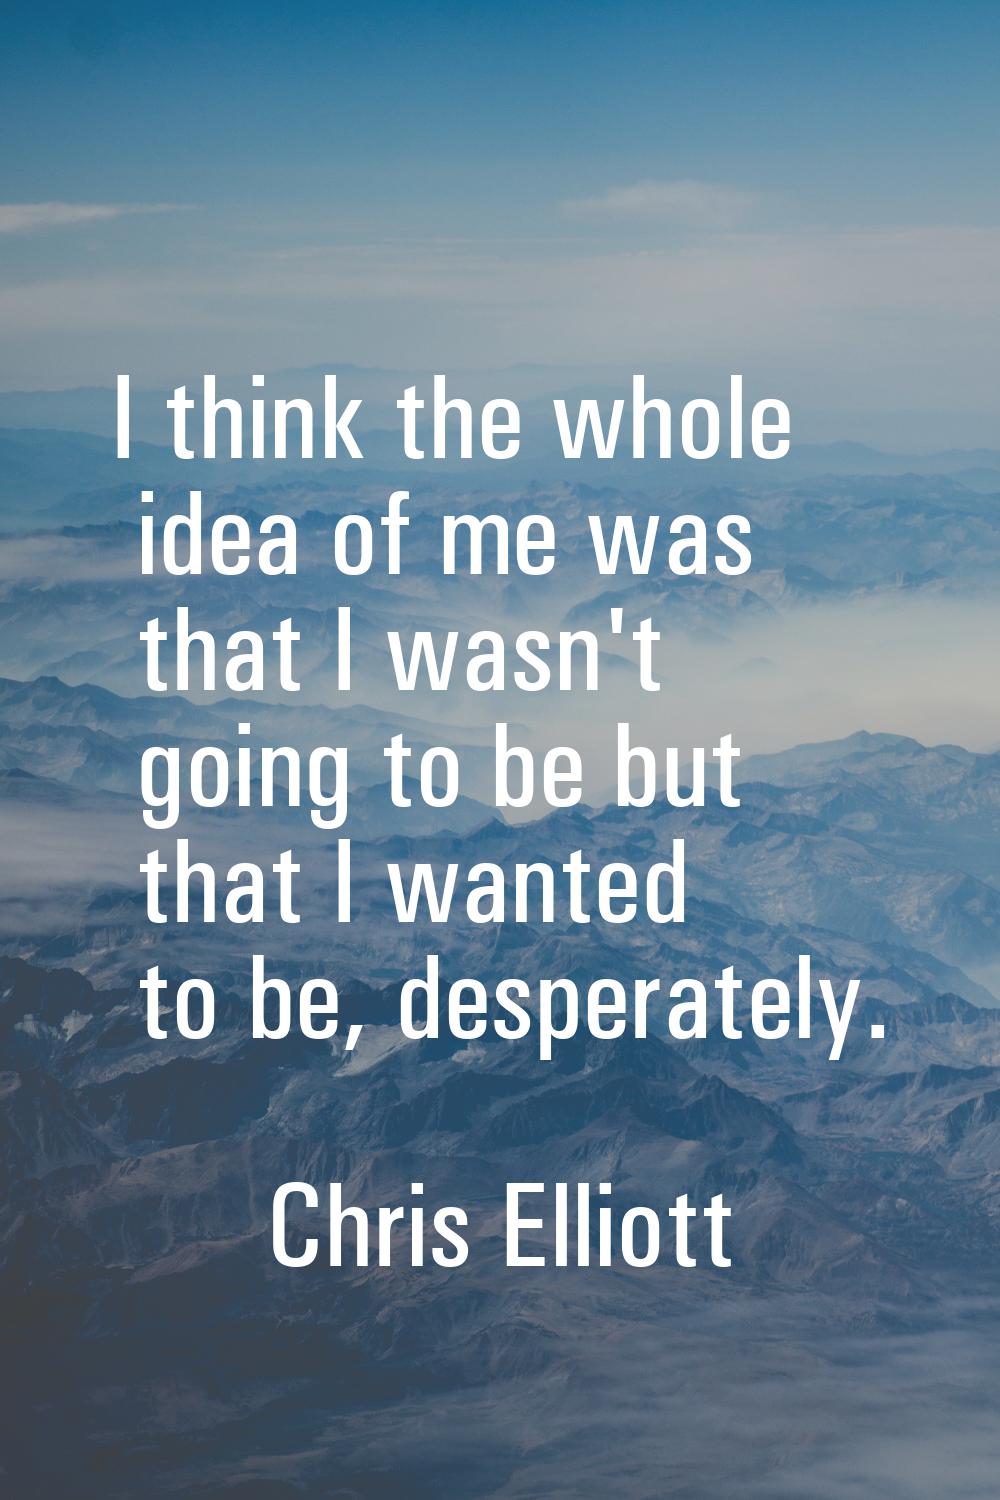 I think the whole idea of me was that I wasn't going to be but that I wanted to be, desperately.